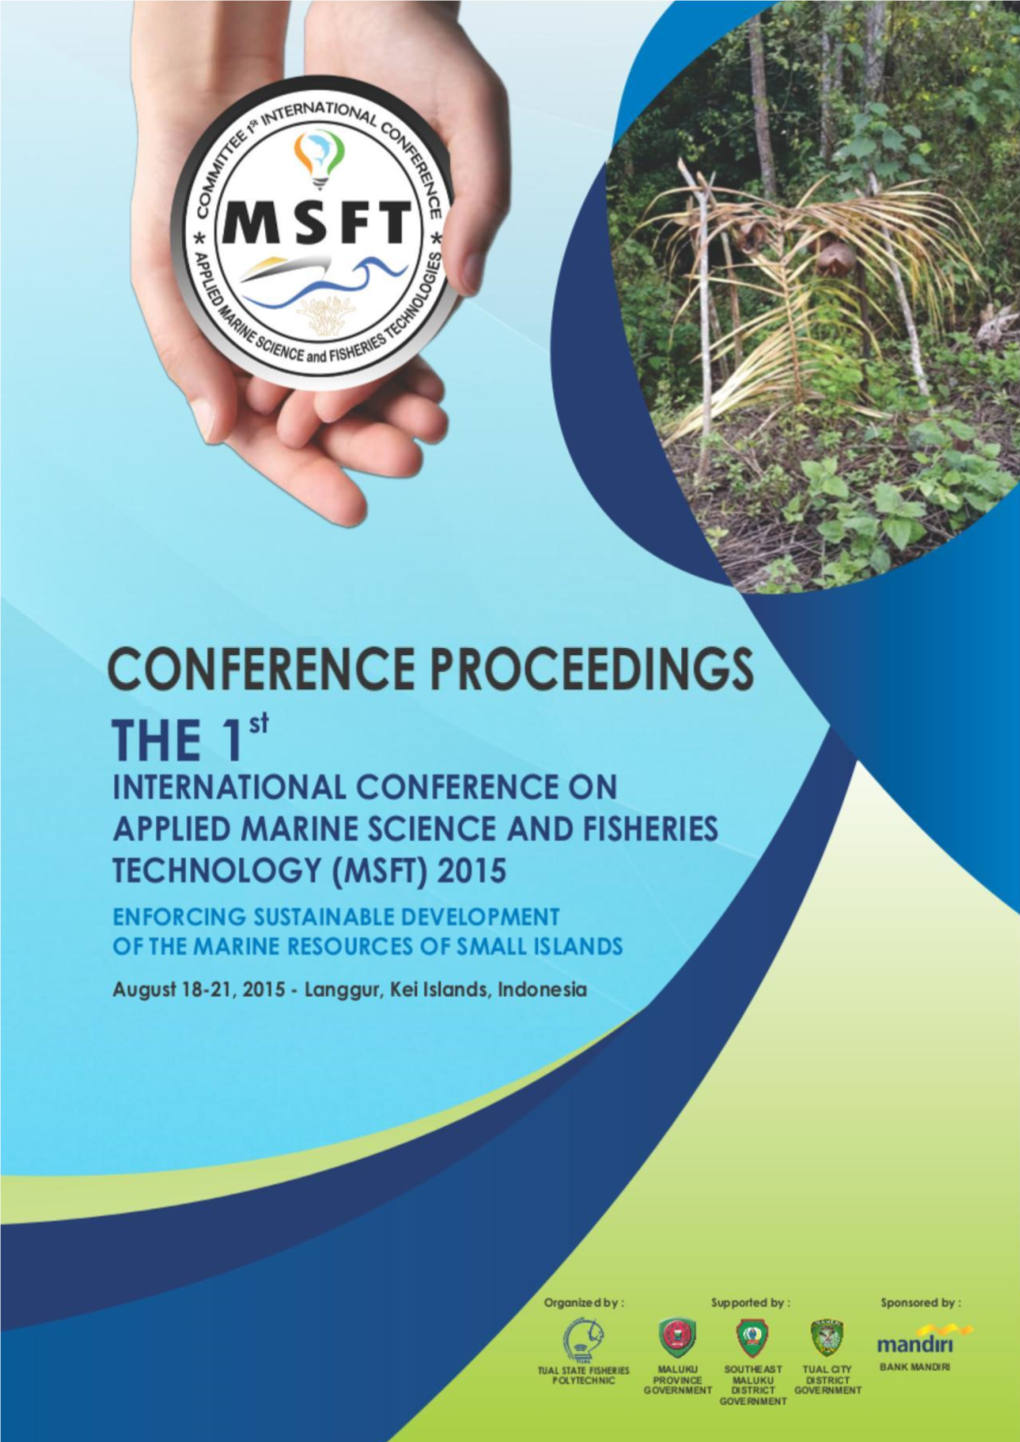 Proceedings of the 1St “International Conference on Applied Marine Science and Fisheries Technology (MSFT) 2015